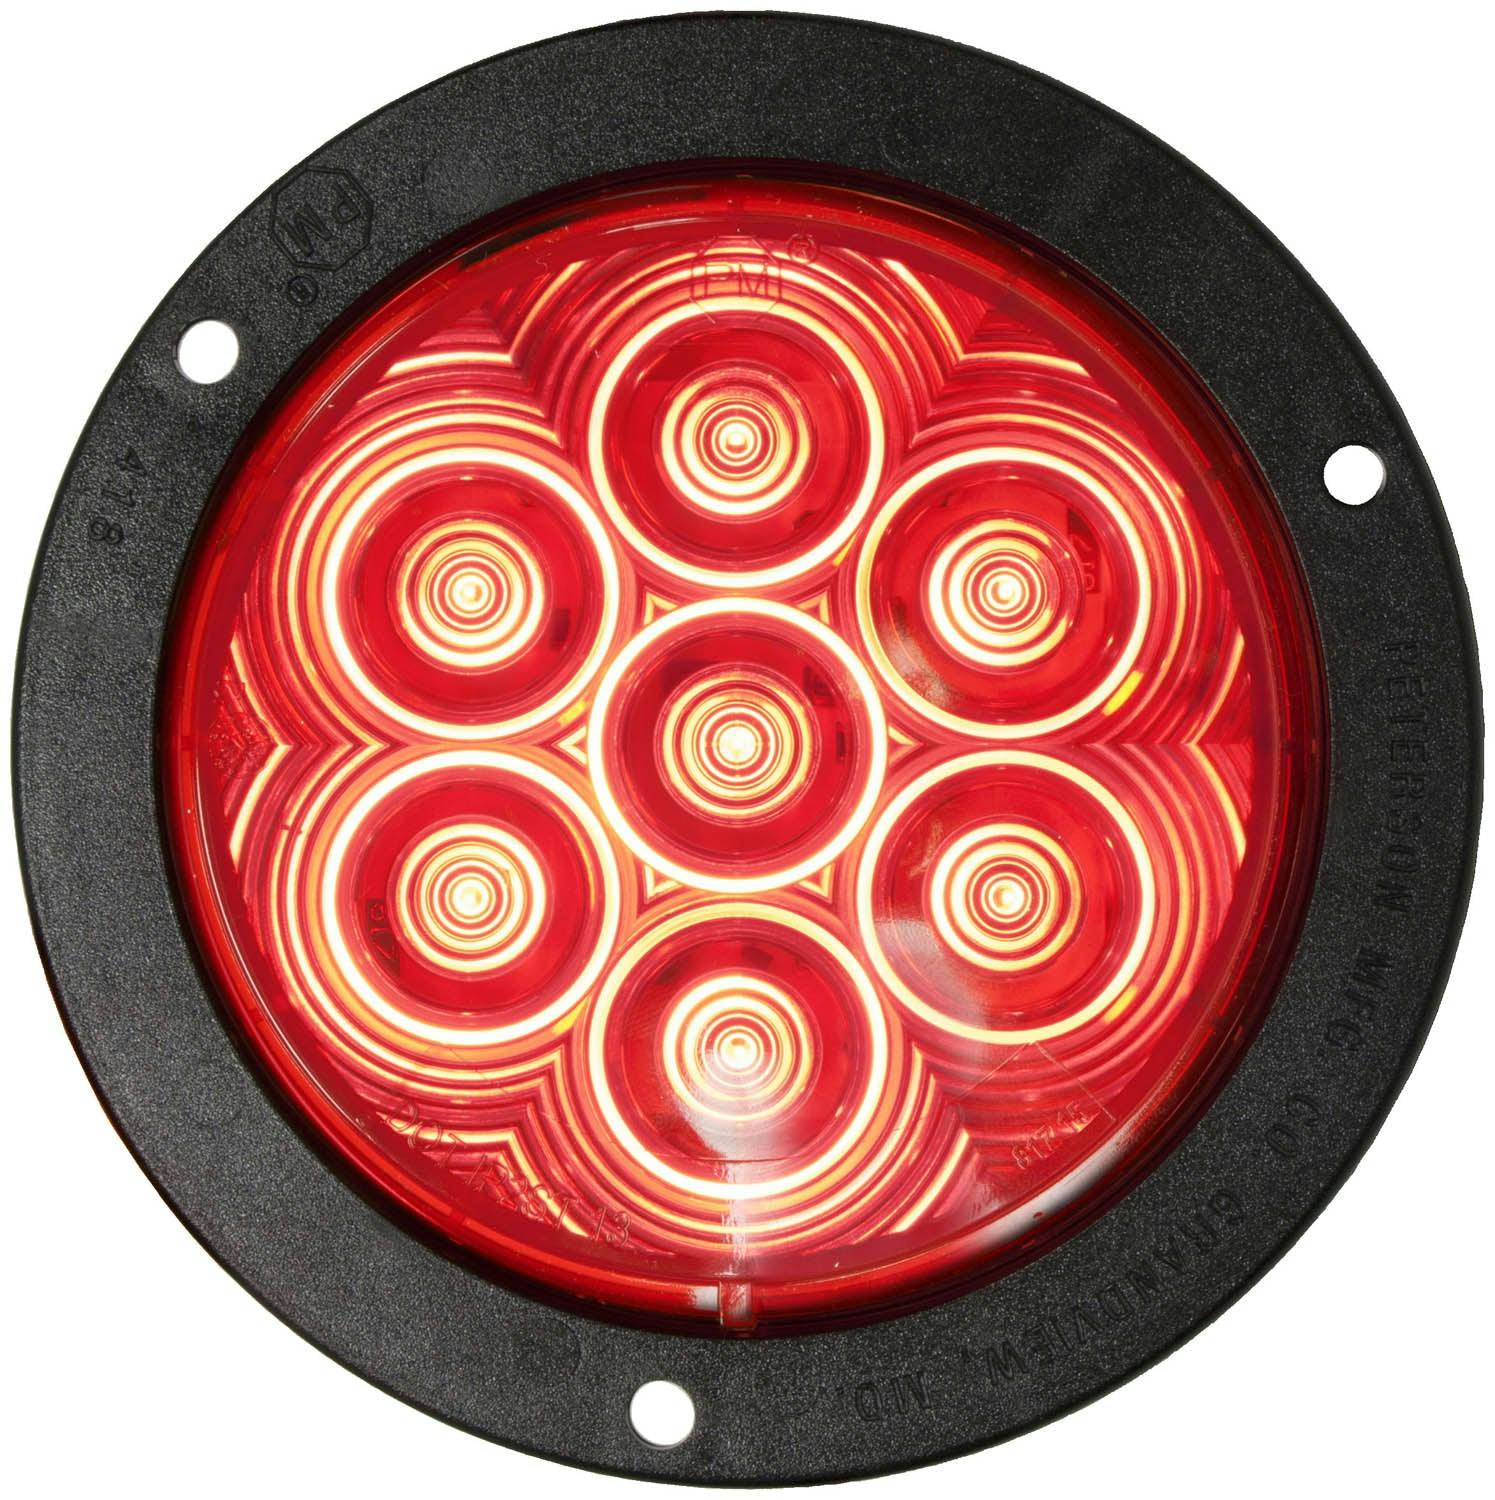 LED Stop/Turn/Tail, Round, Flange-Mount 4", red (Pack of 6)